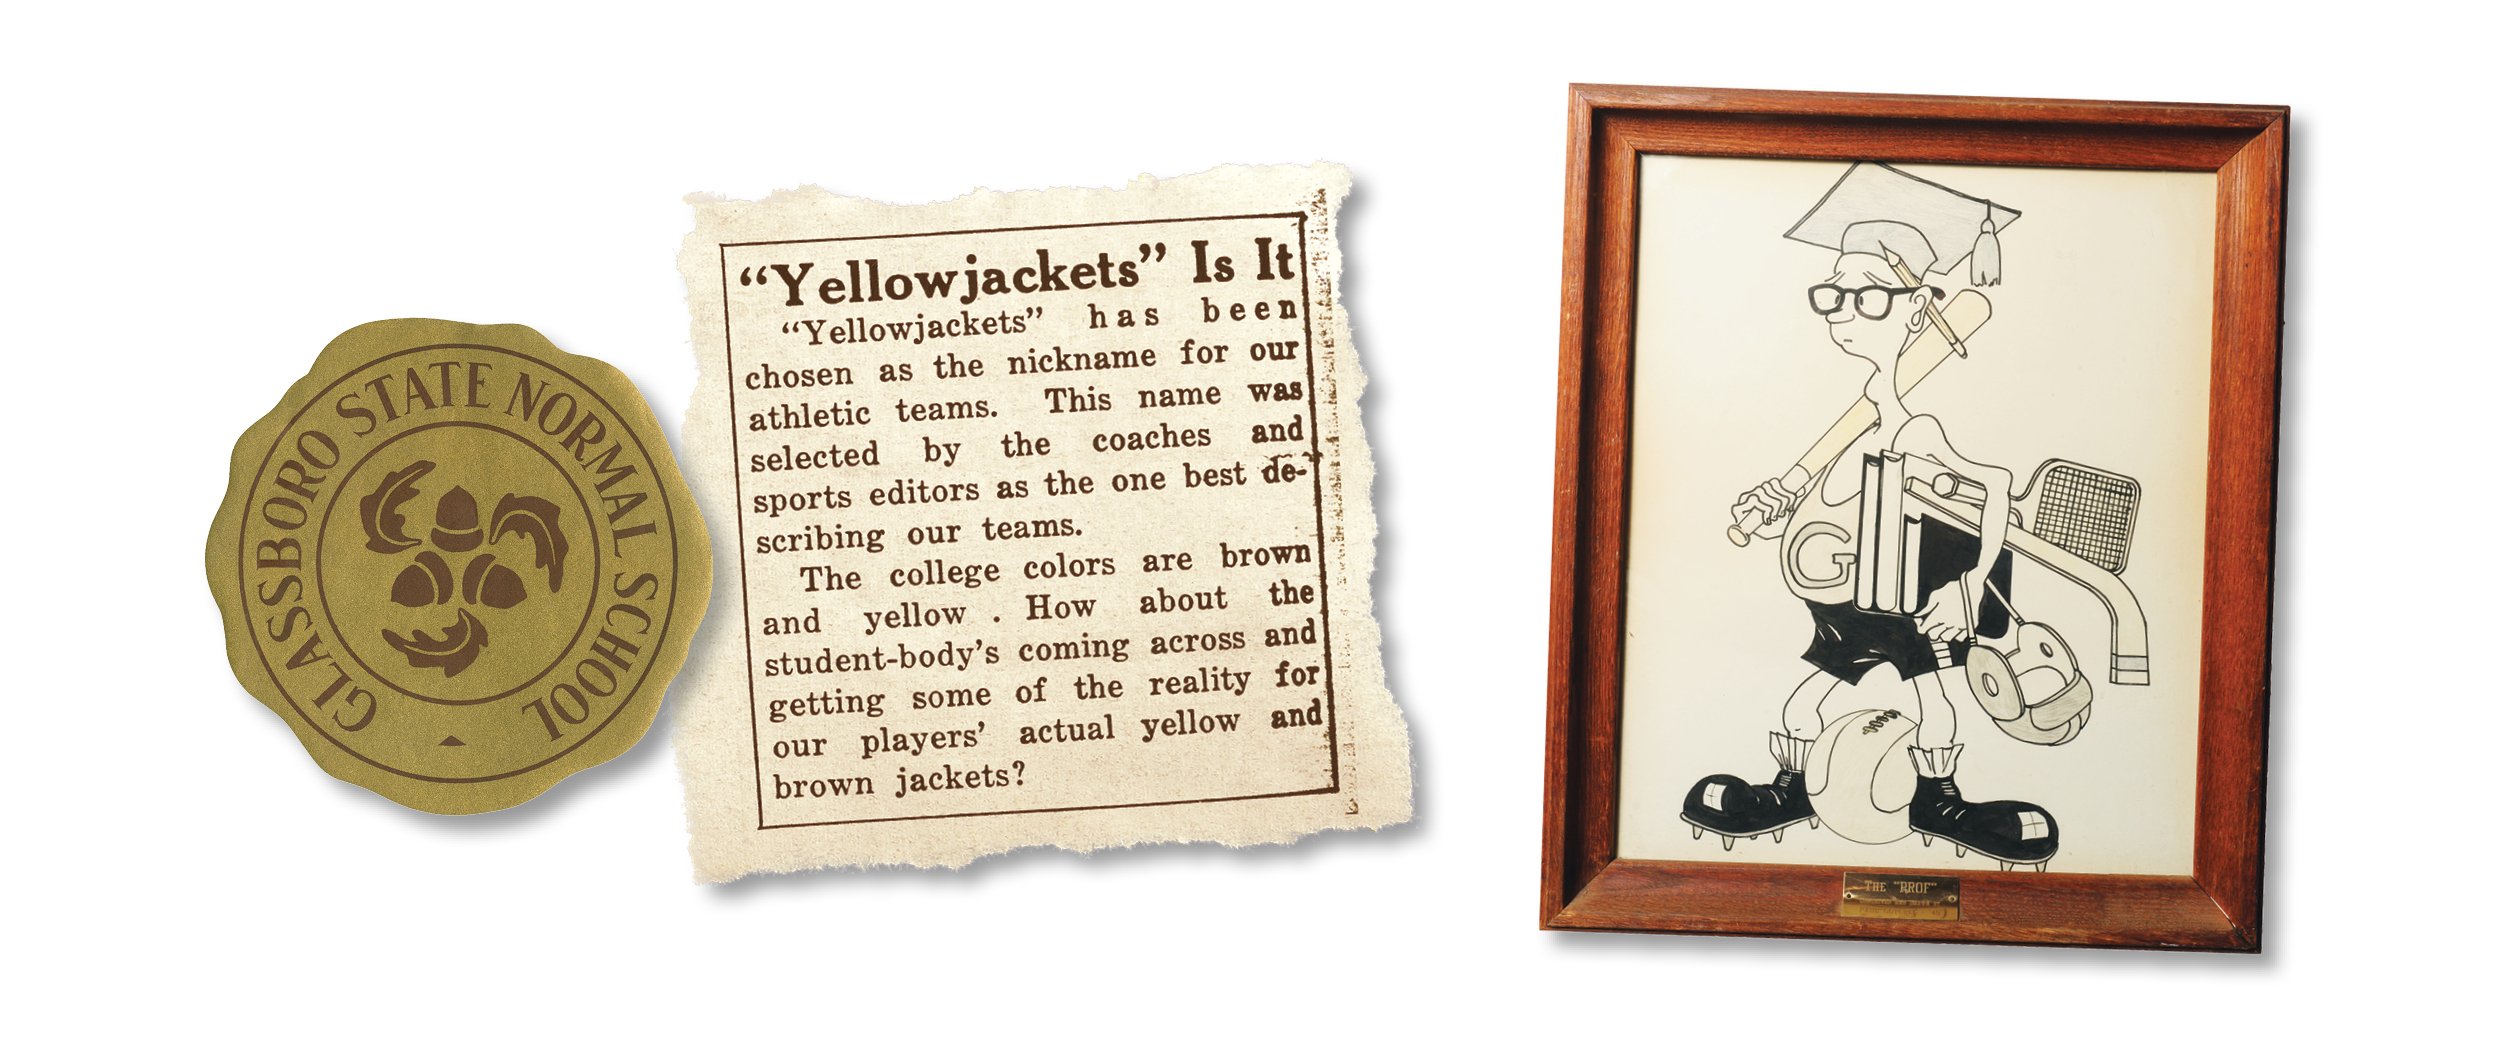 Early uses of brown and gold school colors at Glassboro Normal School; a newspaper clipping about the yellowjackets and a drawing of "The Prof."